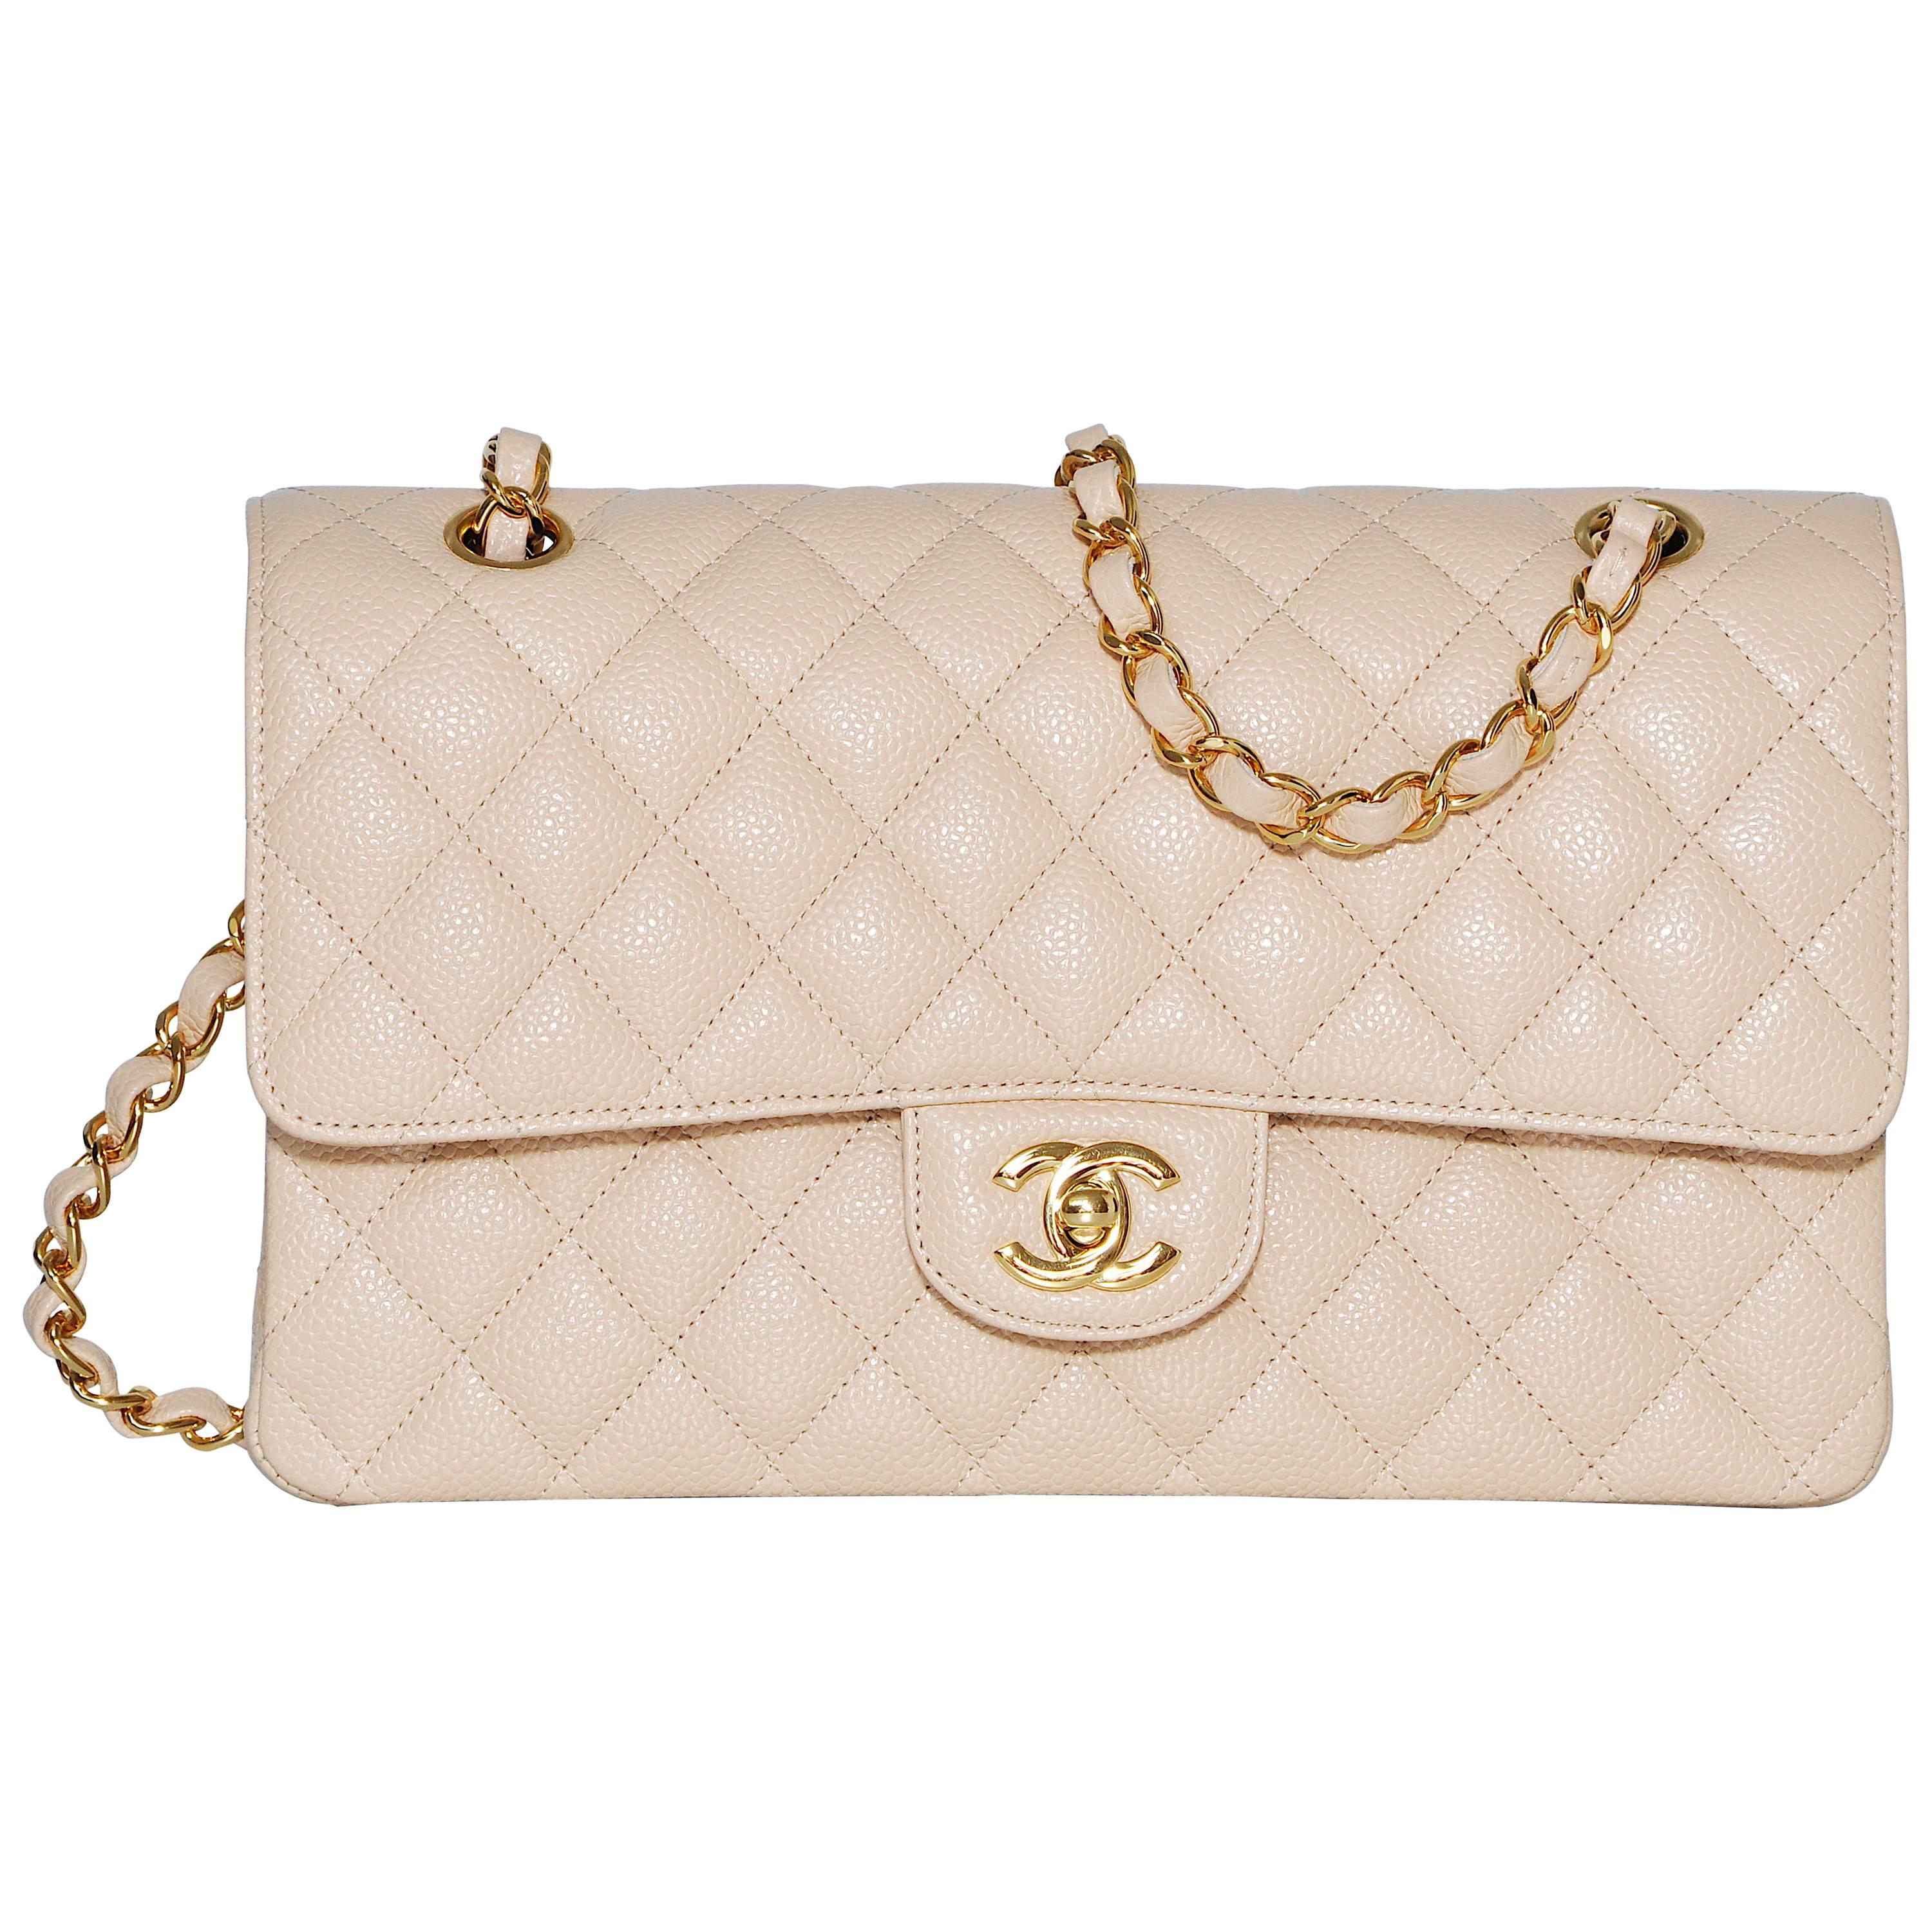 Chanel Beige Double Flap Quilted Caviar Bag Handbag Gold Hardware